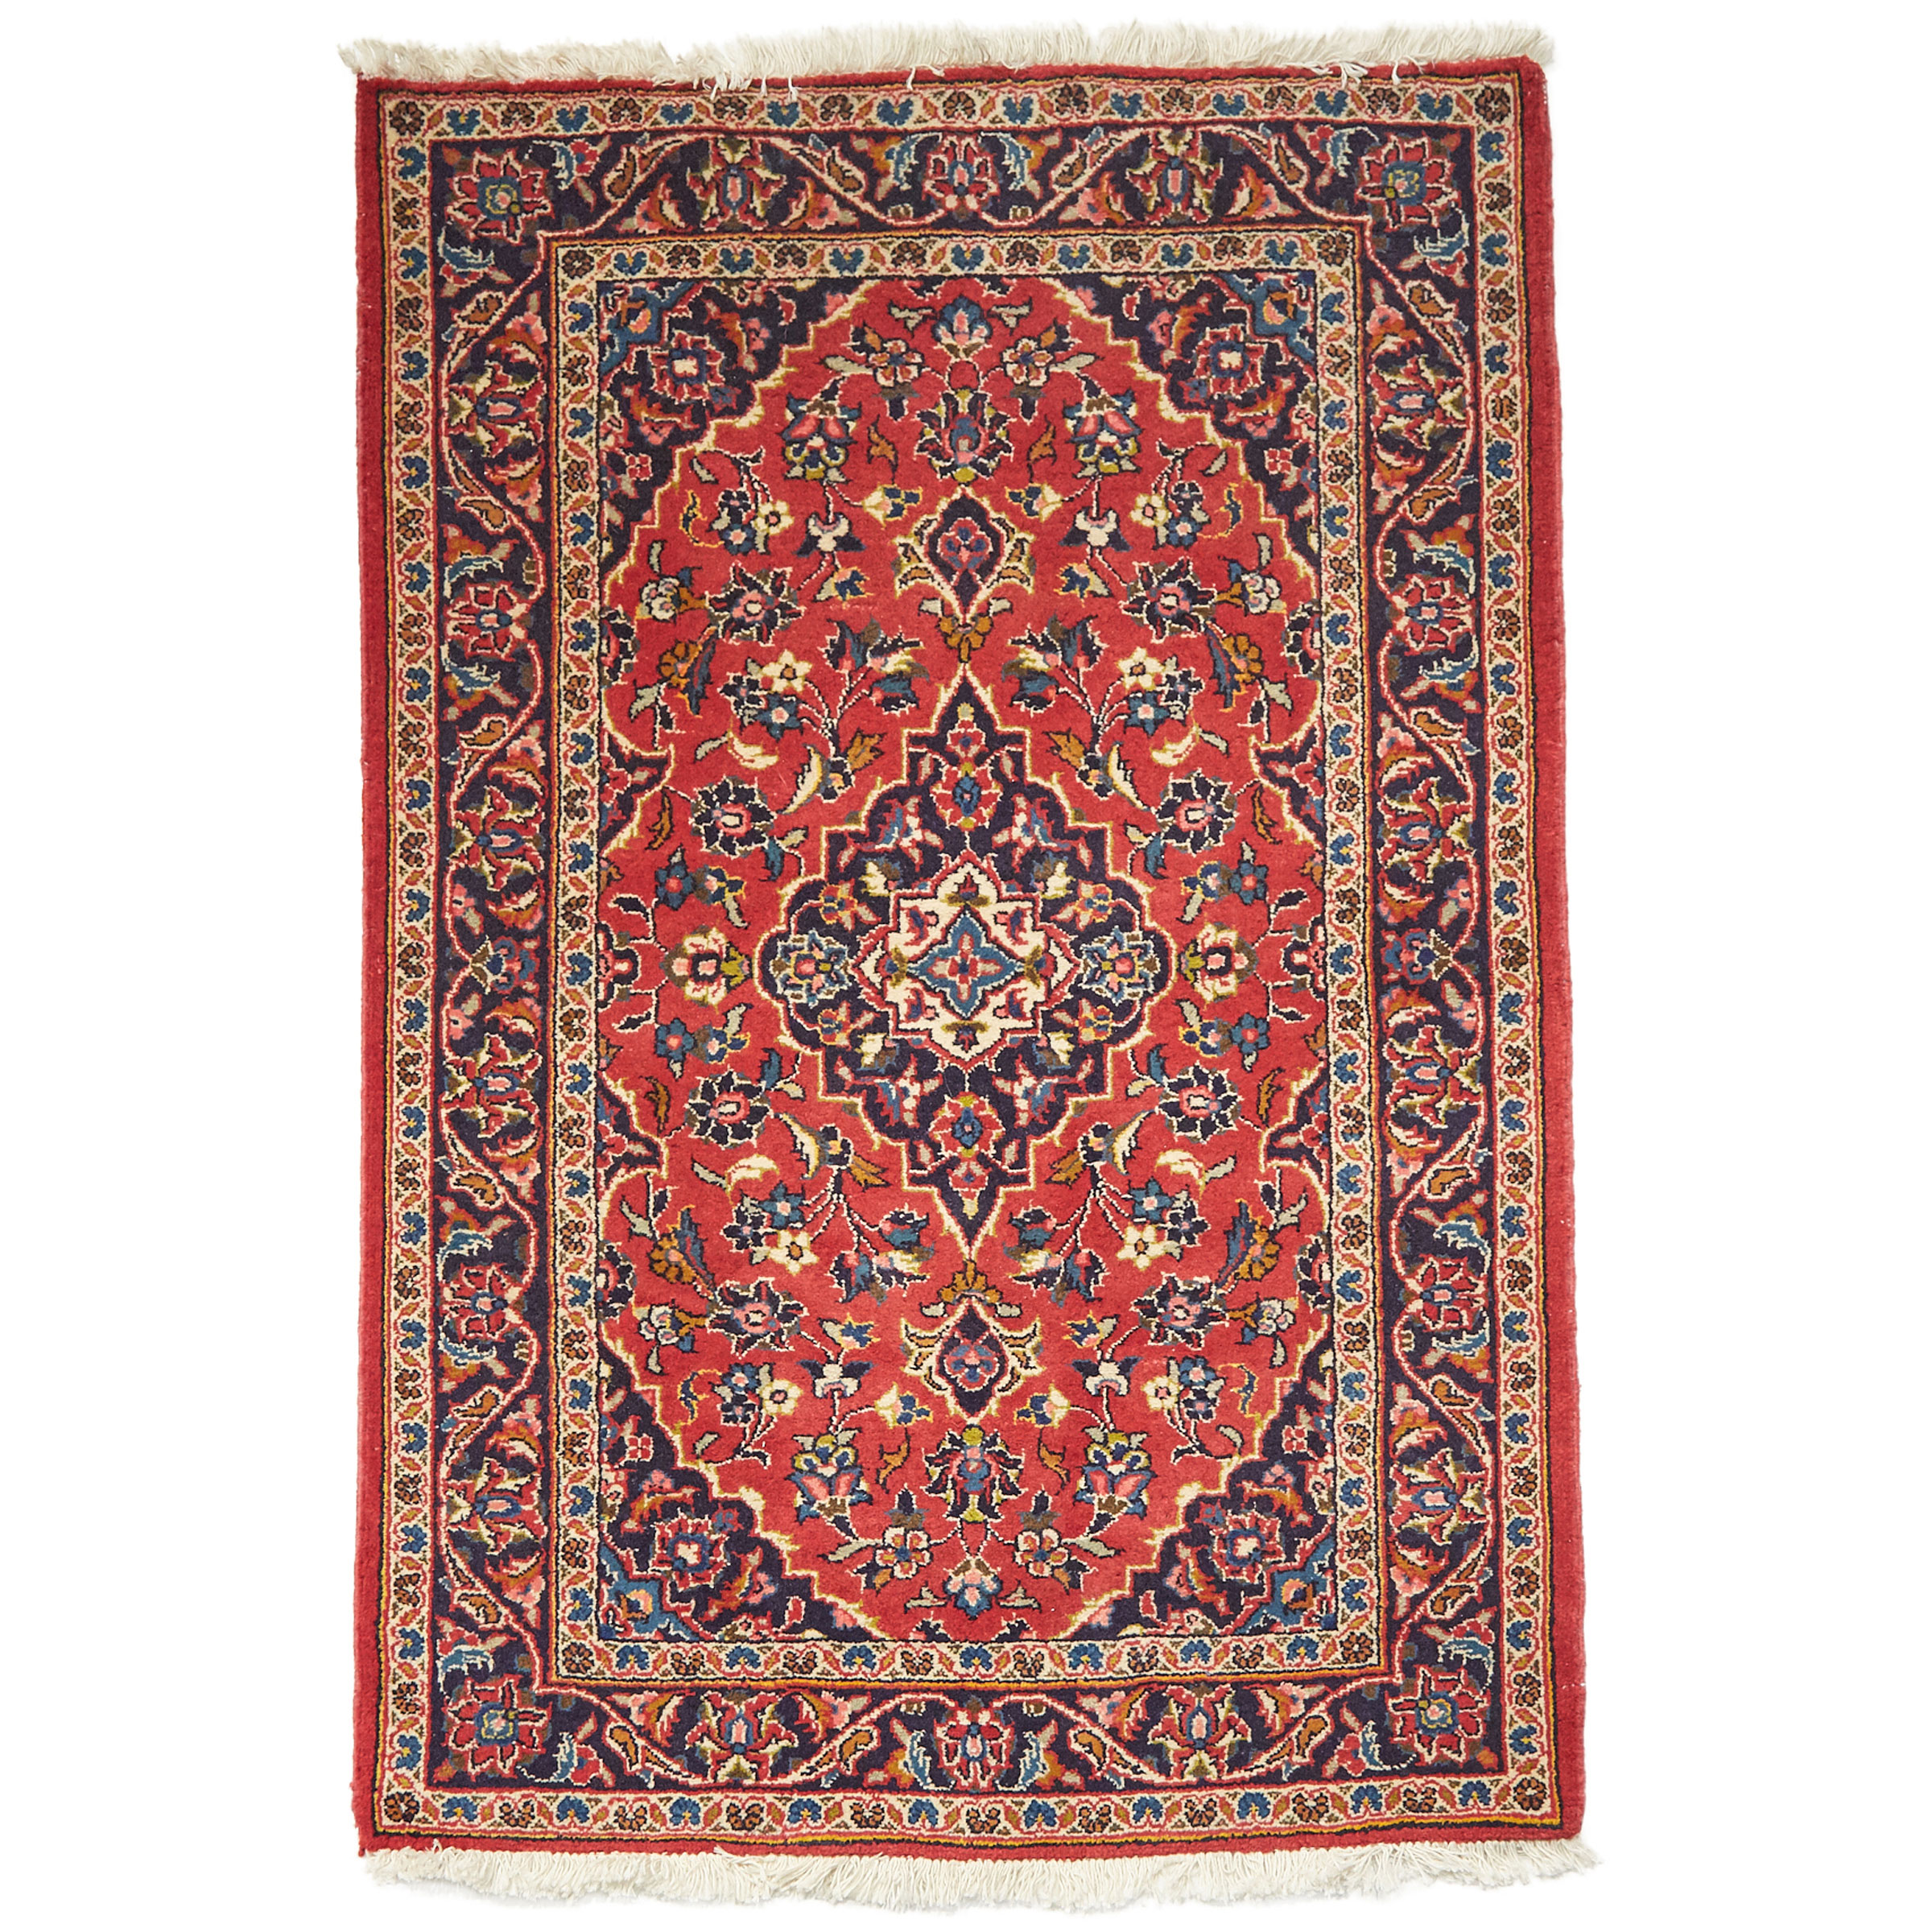 Kashan Rug, Persian, mid to late 20th century